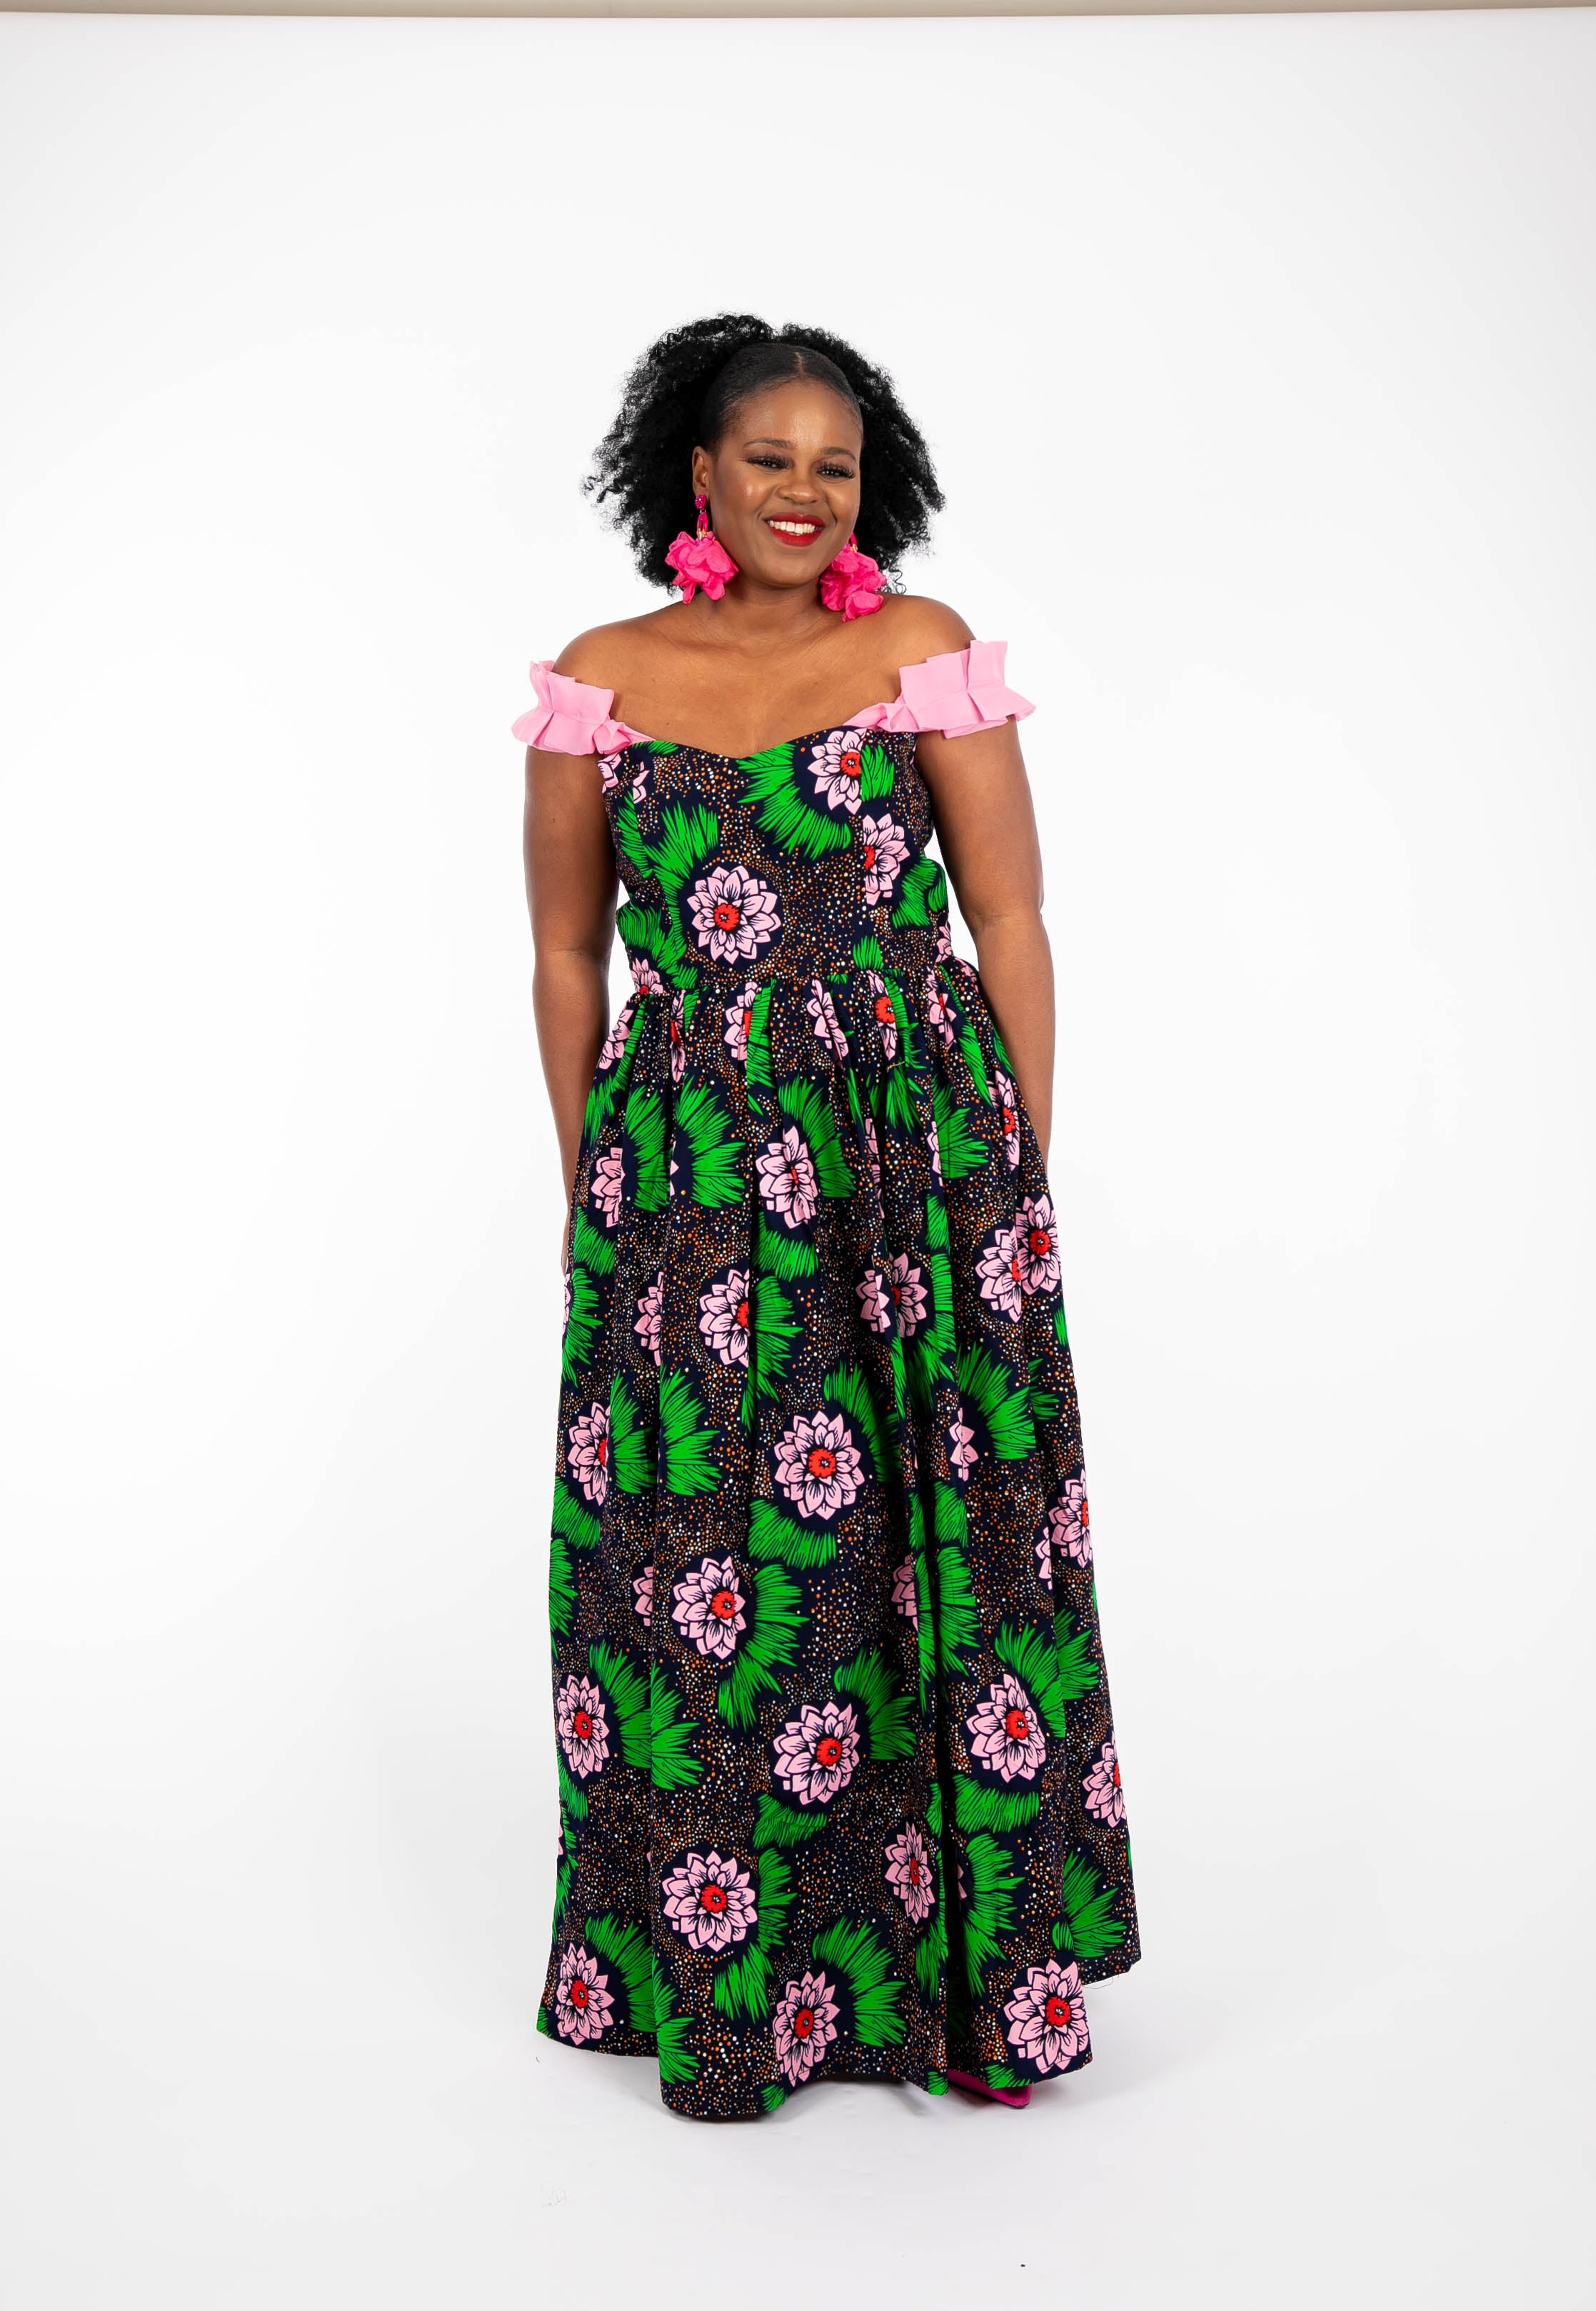 Temad collections  african print ankara Dulce maxi dress,Stylish African print dresses, Modern African dresses, Ankara dress for ladies, Latest Ankara dresses, Long Ankara dresses, ankara dresses Uk, Ankara dresses styles, stylish Ankara dresses, beautiful African dresses, African Ankara dresses for ladies, African dresses styles, ankara print, ankara maxi dresses,Ankara midi dresses, pink african print dresses, African print dress with pockets, Green african print maxi dress, African maxi dress 